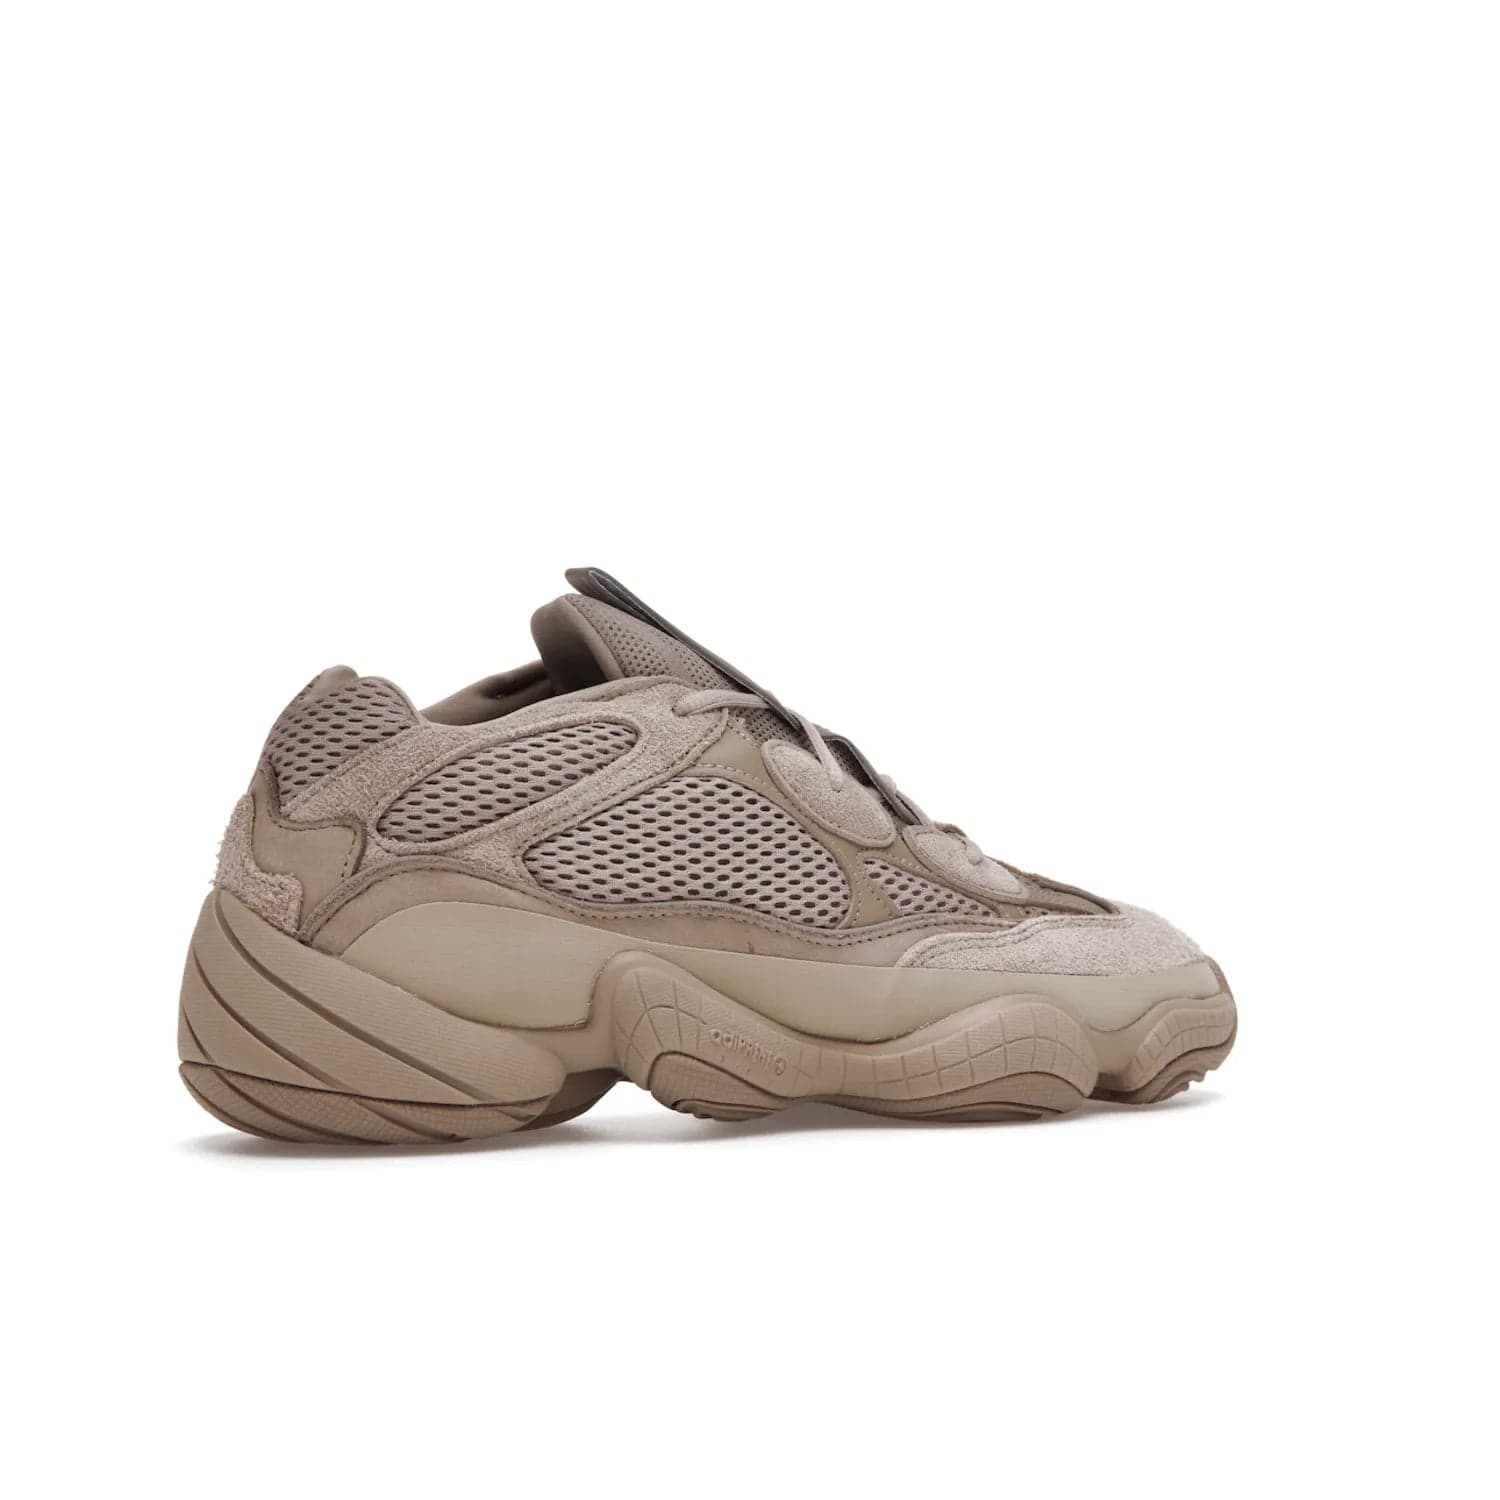 adidas Yeezy 500 Taupe Light - Image 34 - Only at www.BallersClubKickz.com - The adidas Yeezy 500 Taupe Light combines mesh, leather, and suede, with a durable adiPRENE sole for an eye-catching accessory. Reflective piping adds the perfect finishing touches to this unique silhouette. Ideal for any wardrobe, releasing in June 2021.